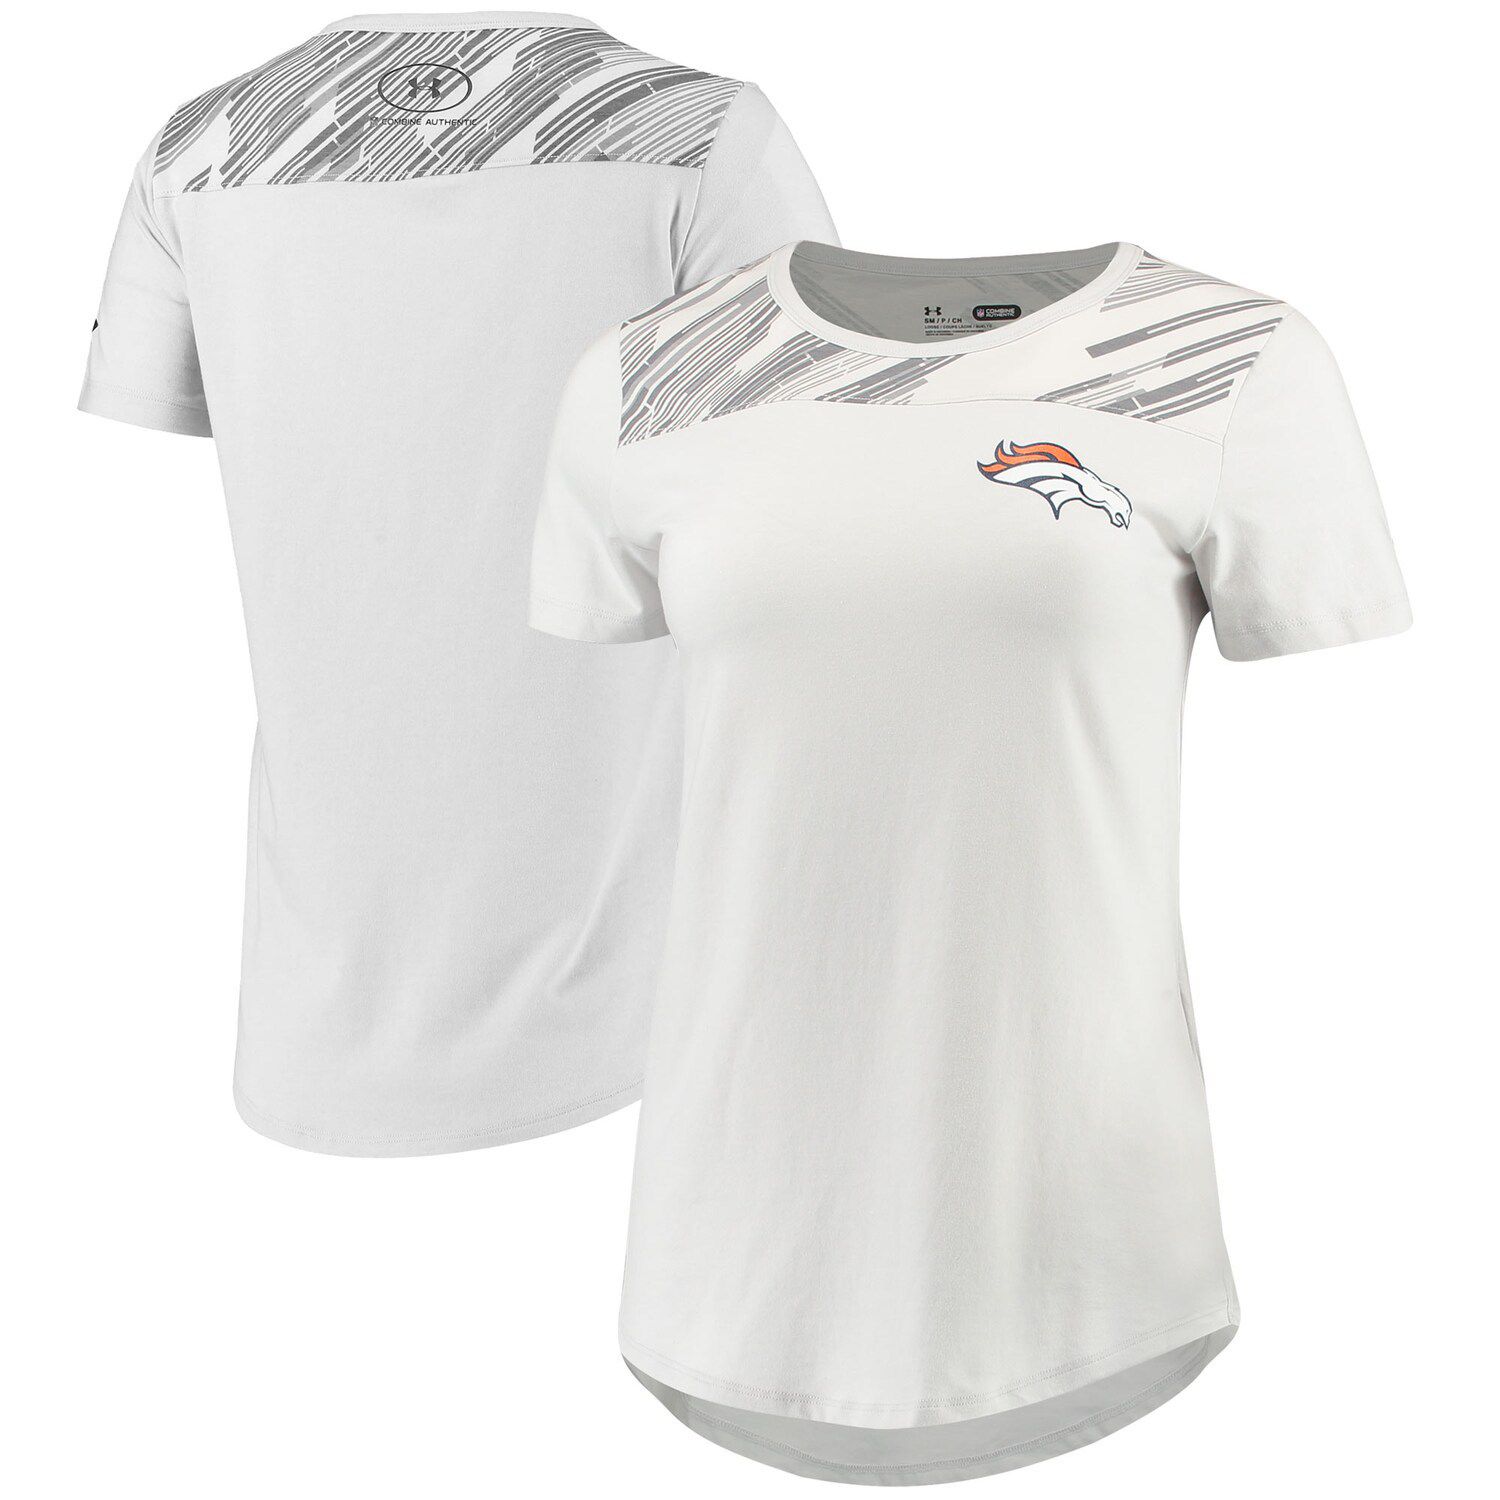 black and white broncos jersey